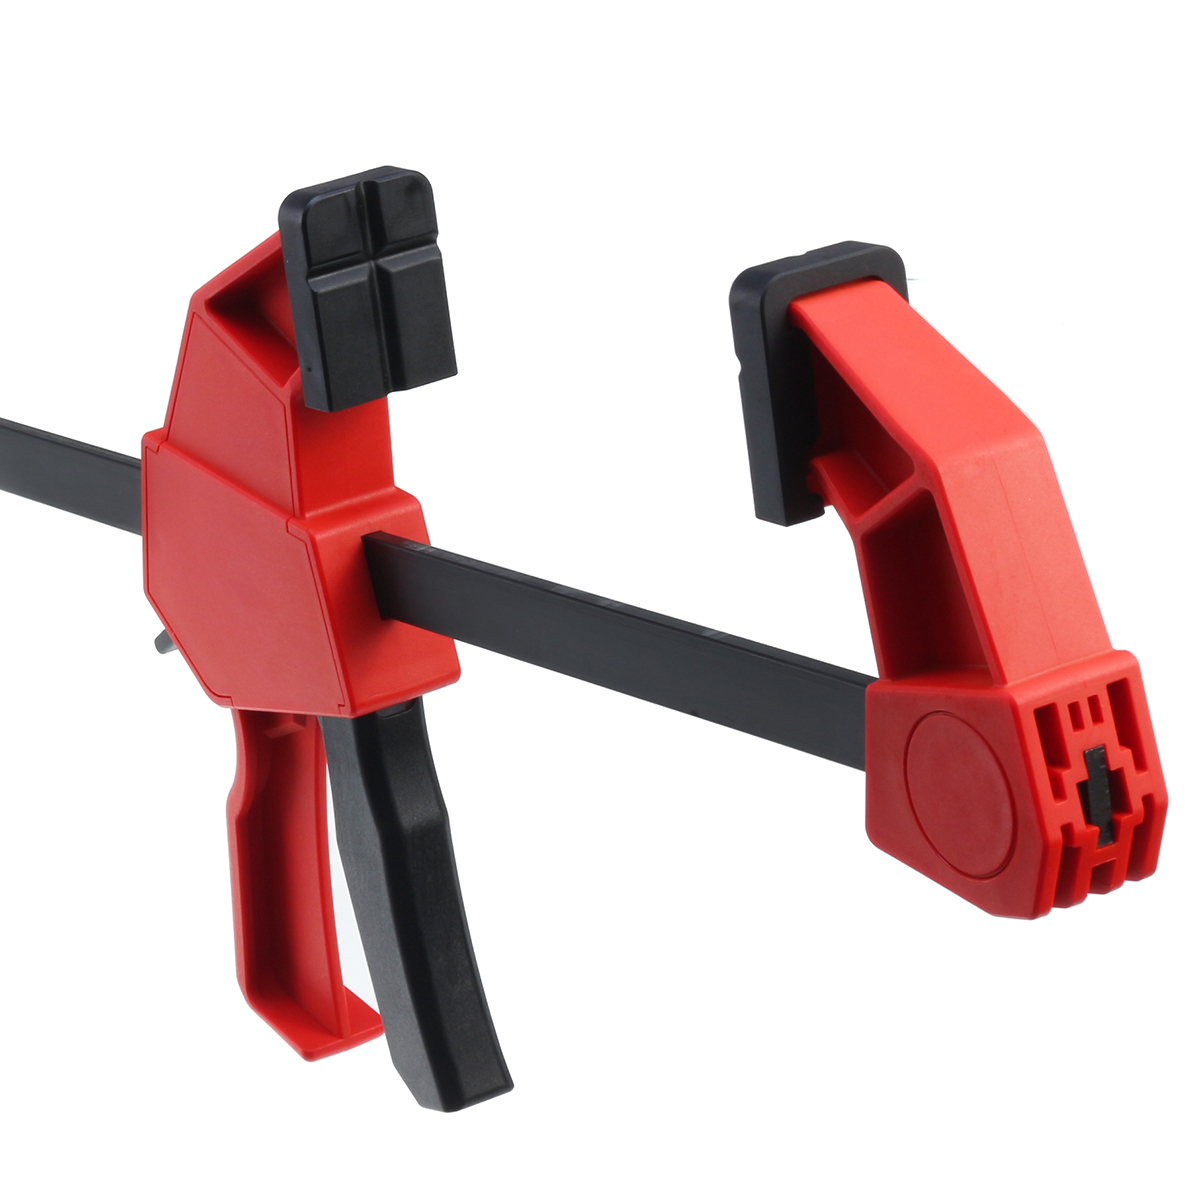 3036Inch-Heavy-Duty-F-Clamp-WoodWorking-Quick-Grip-Bar-Plastic-Grip-Wood-Clamp-1630185-7